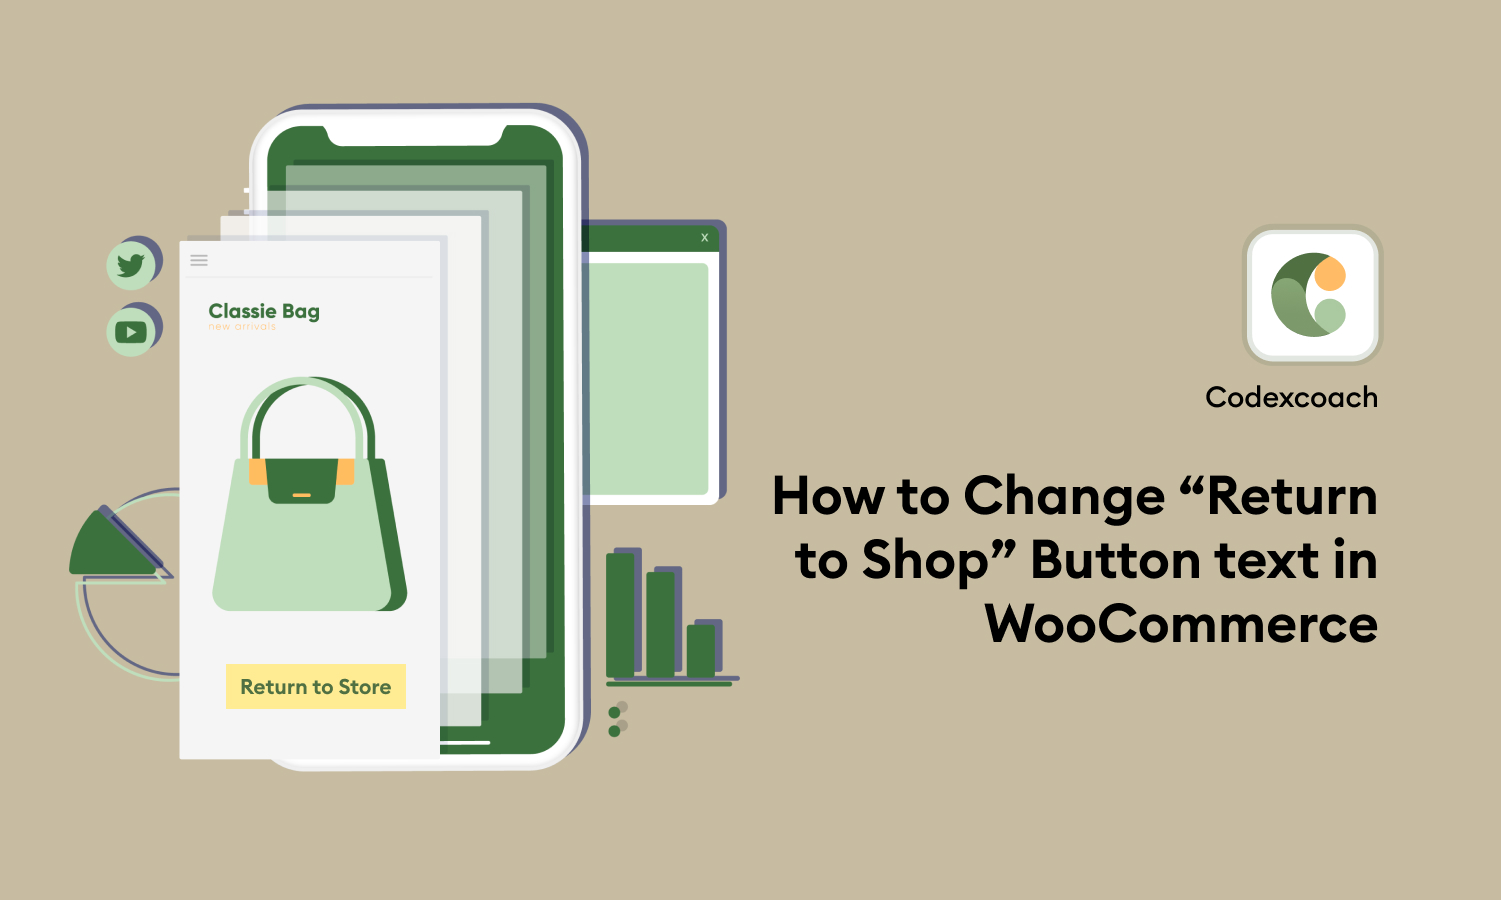 How to Change “Return to Shop” Button text in WooCommerce